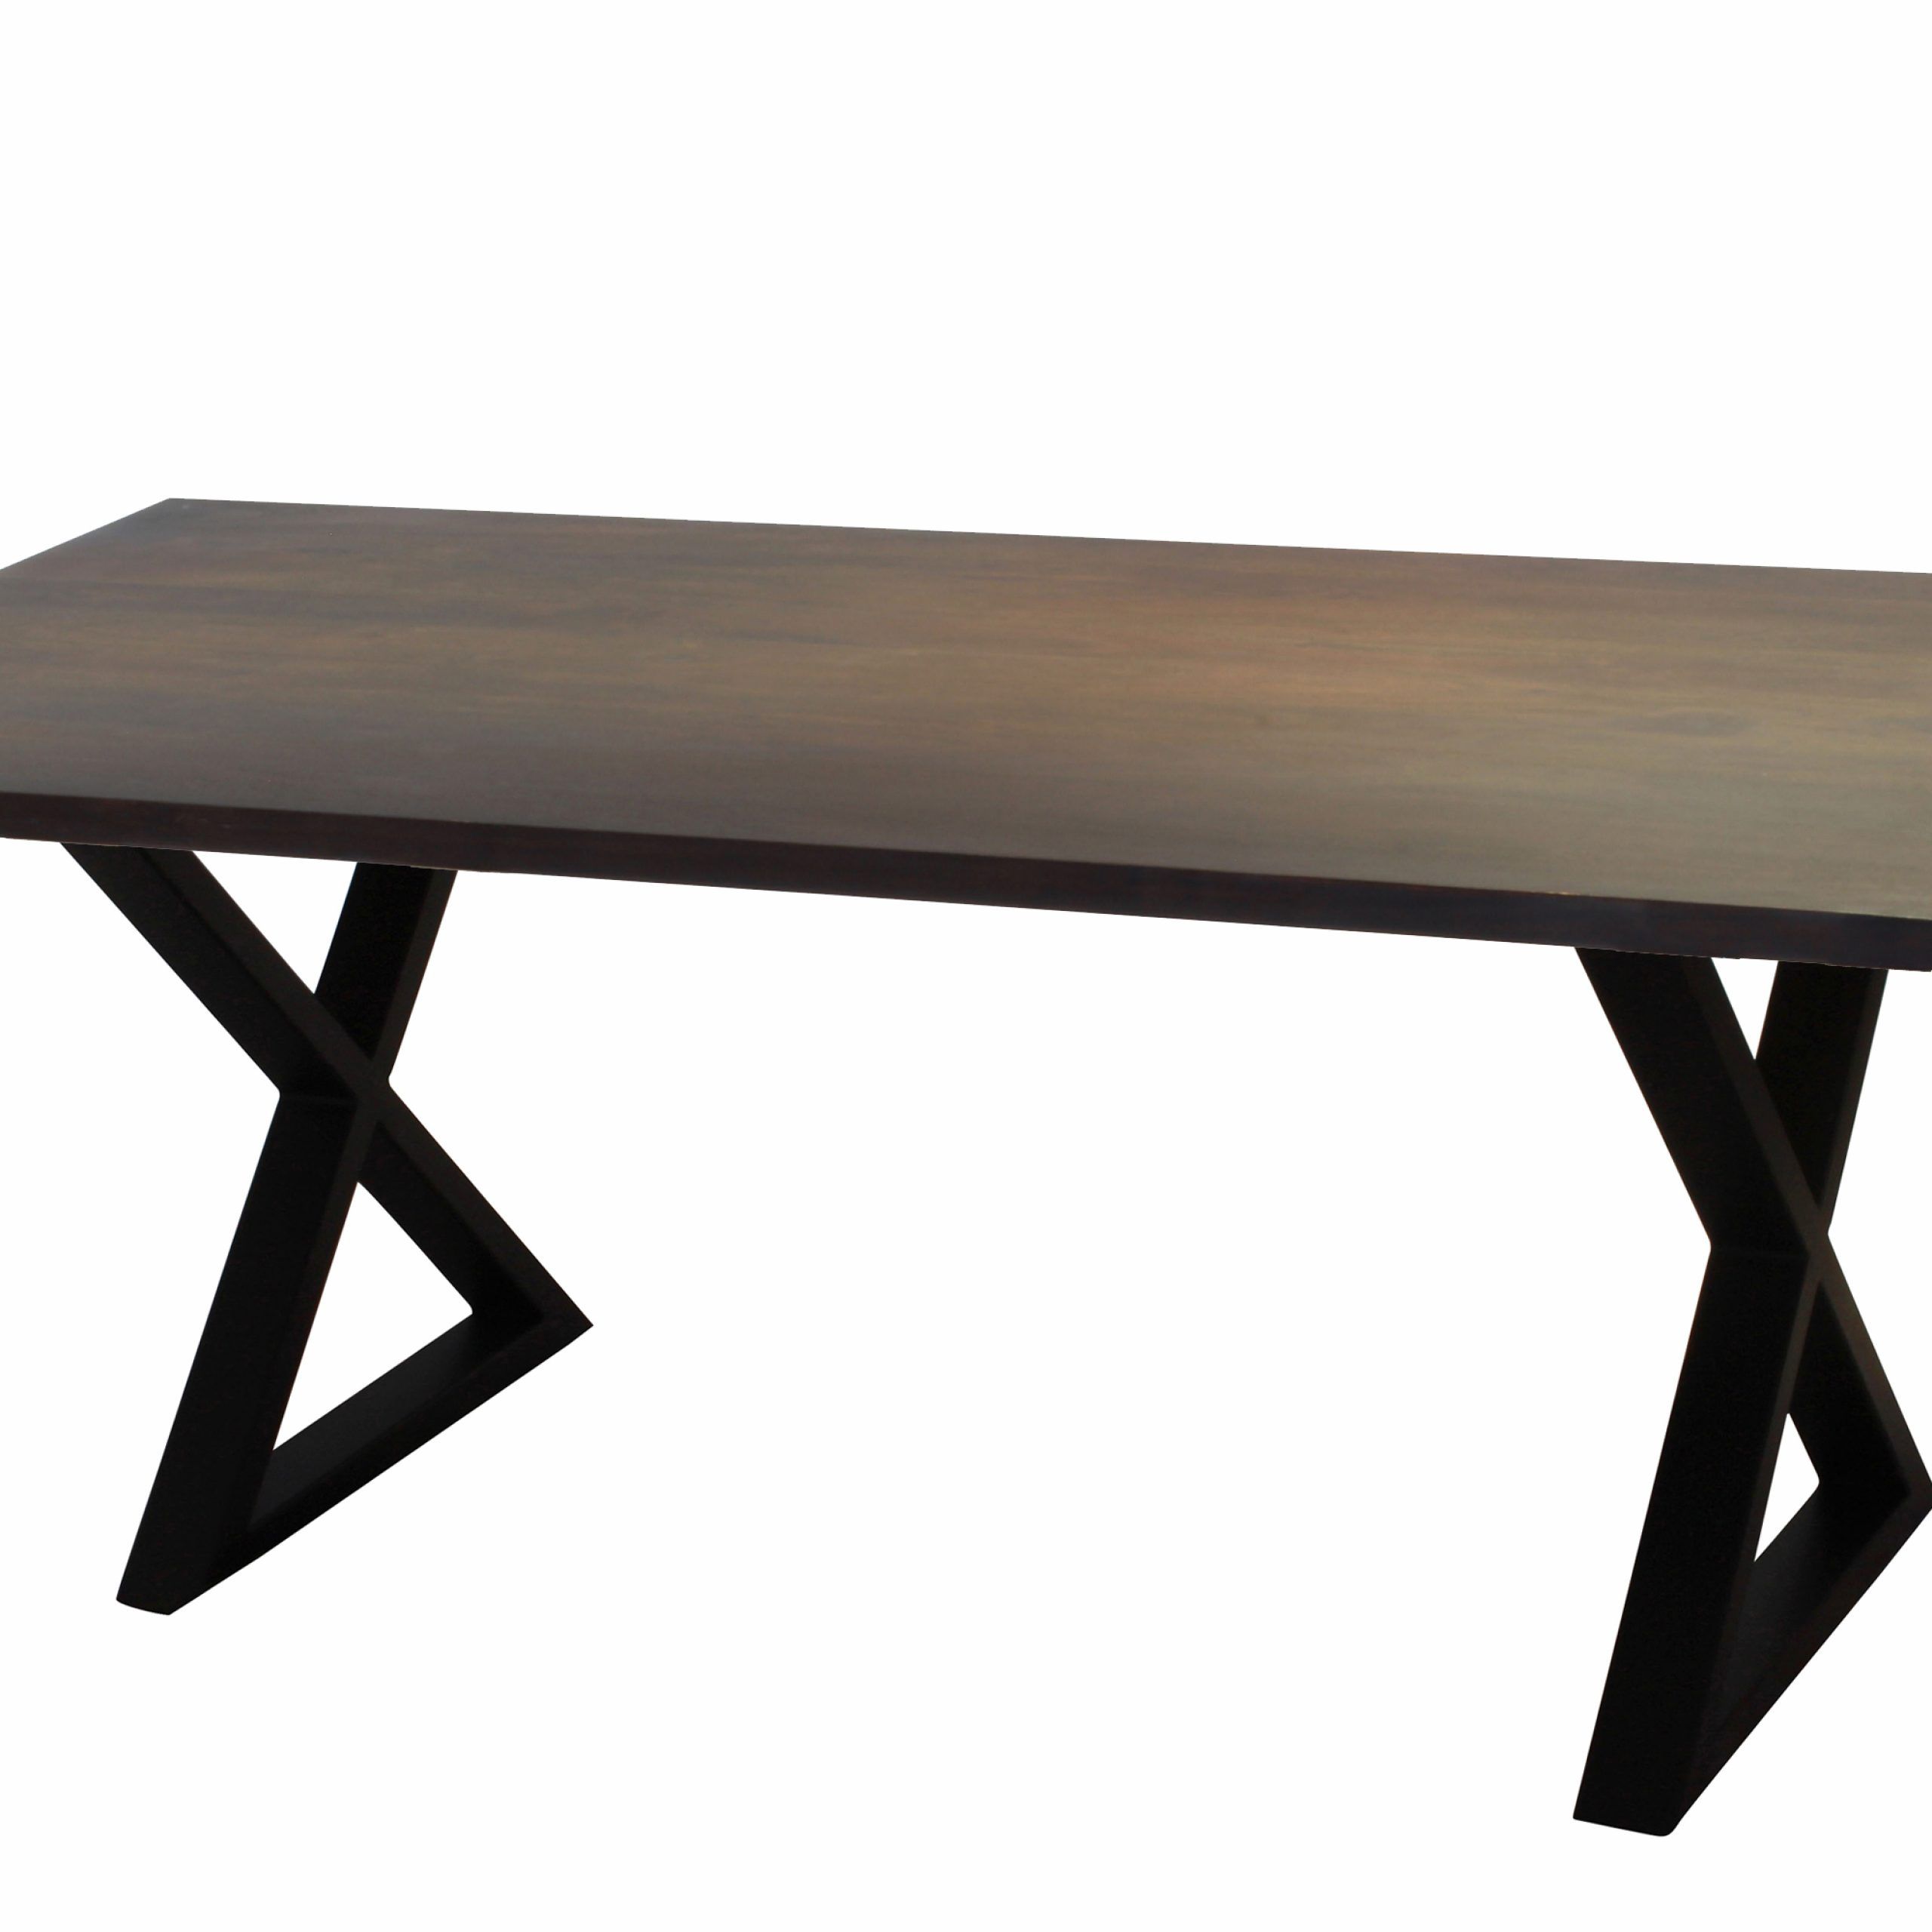 Corcoran Acacia Live Edge Dining Table With Black X Legs – 72" For Trendy Acacia Dining Tables With Black X Leg (View 9 of 25)